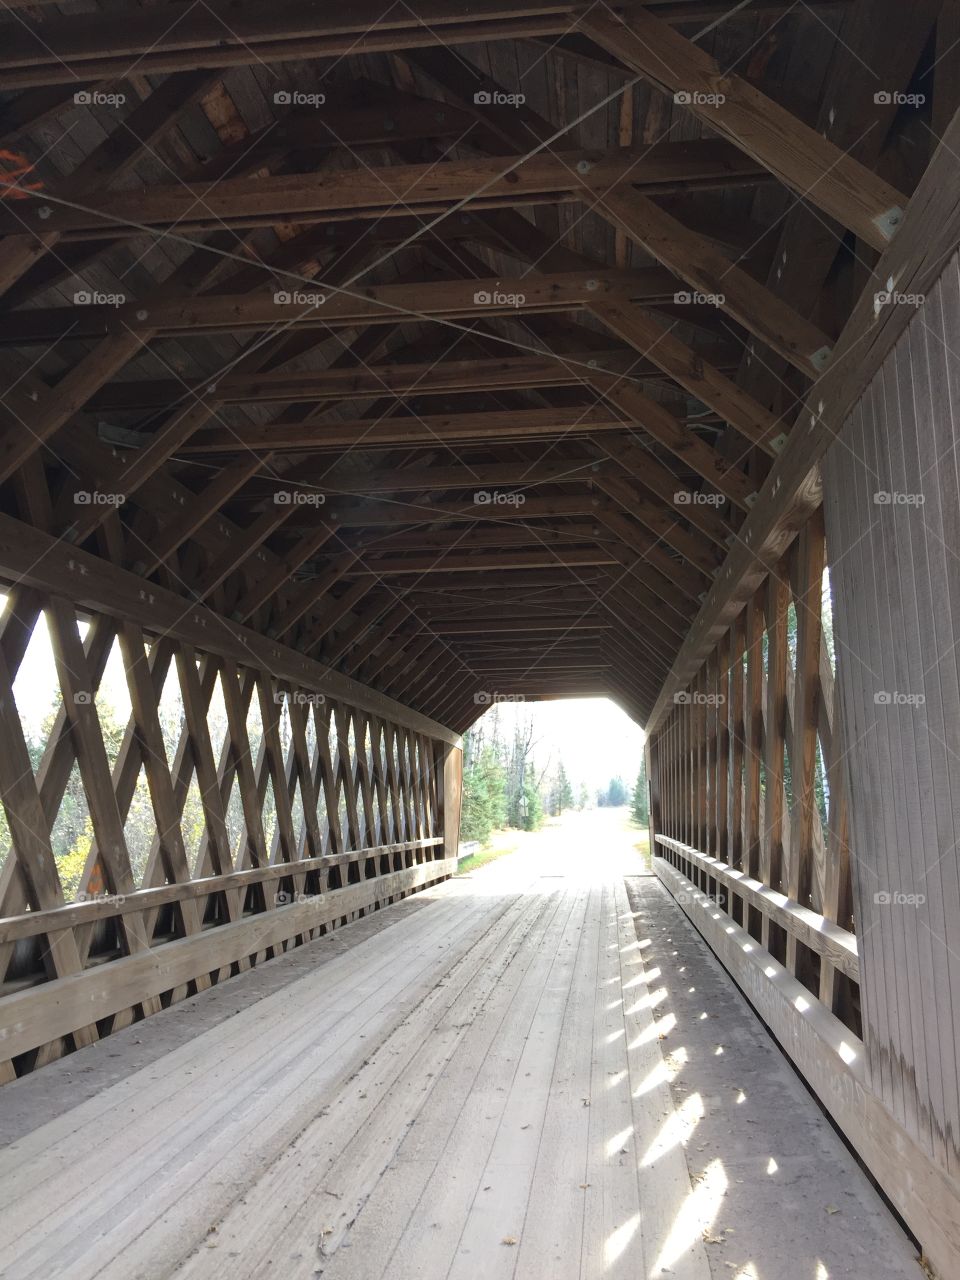 Looking into the covered bridge